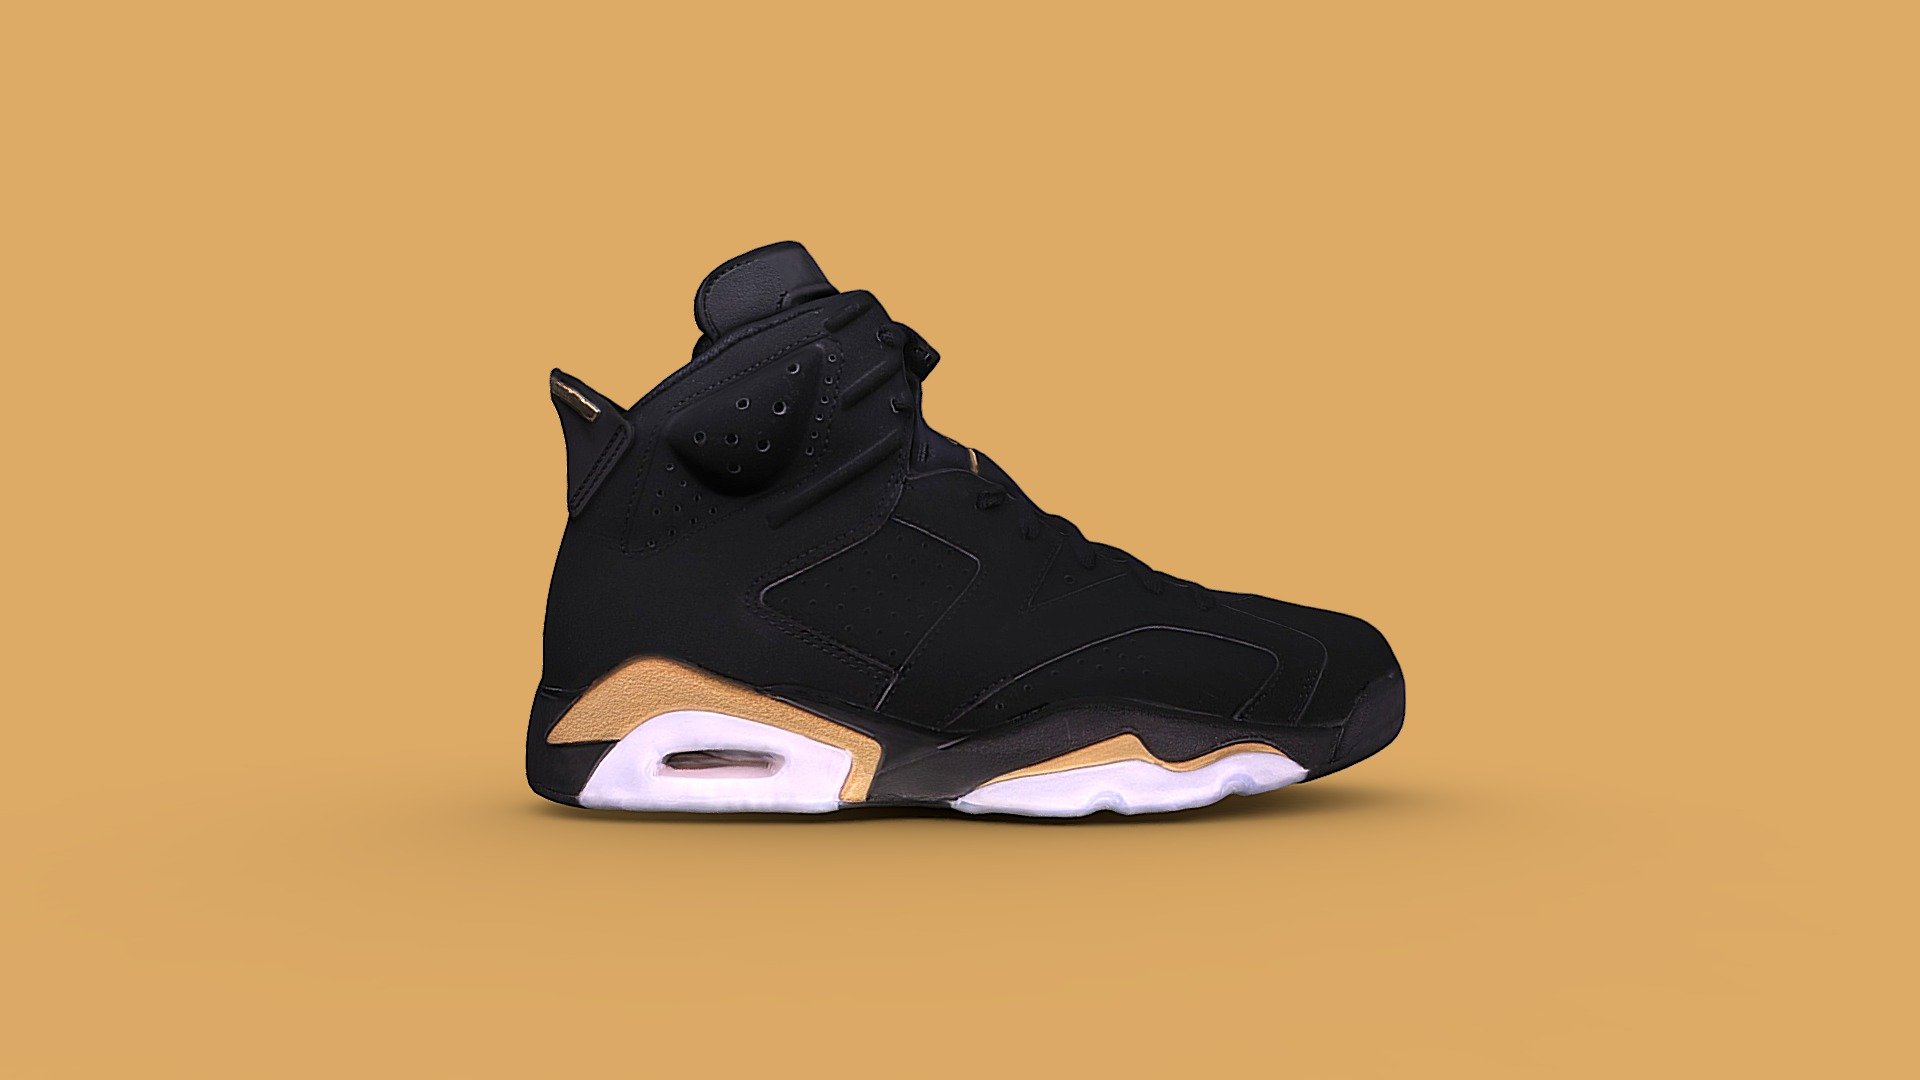 This model was created using Switch 3D's innovative scanning technology.

➖

Purchase the physical sneaker on StockX

➖

Switch 3D 

Want professional 3D scans of your products? Let's talk! 👉 switch3d.co - Air Jordan 6 Retro DMP Sneaker - Buy Royalty Free 3D model by Switch 3D (@switch3d) 3d model